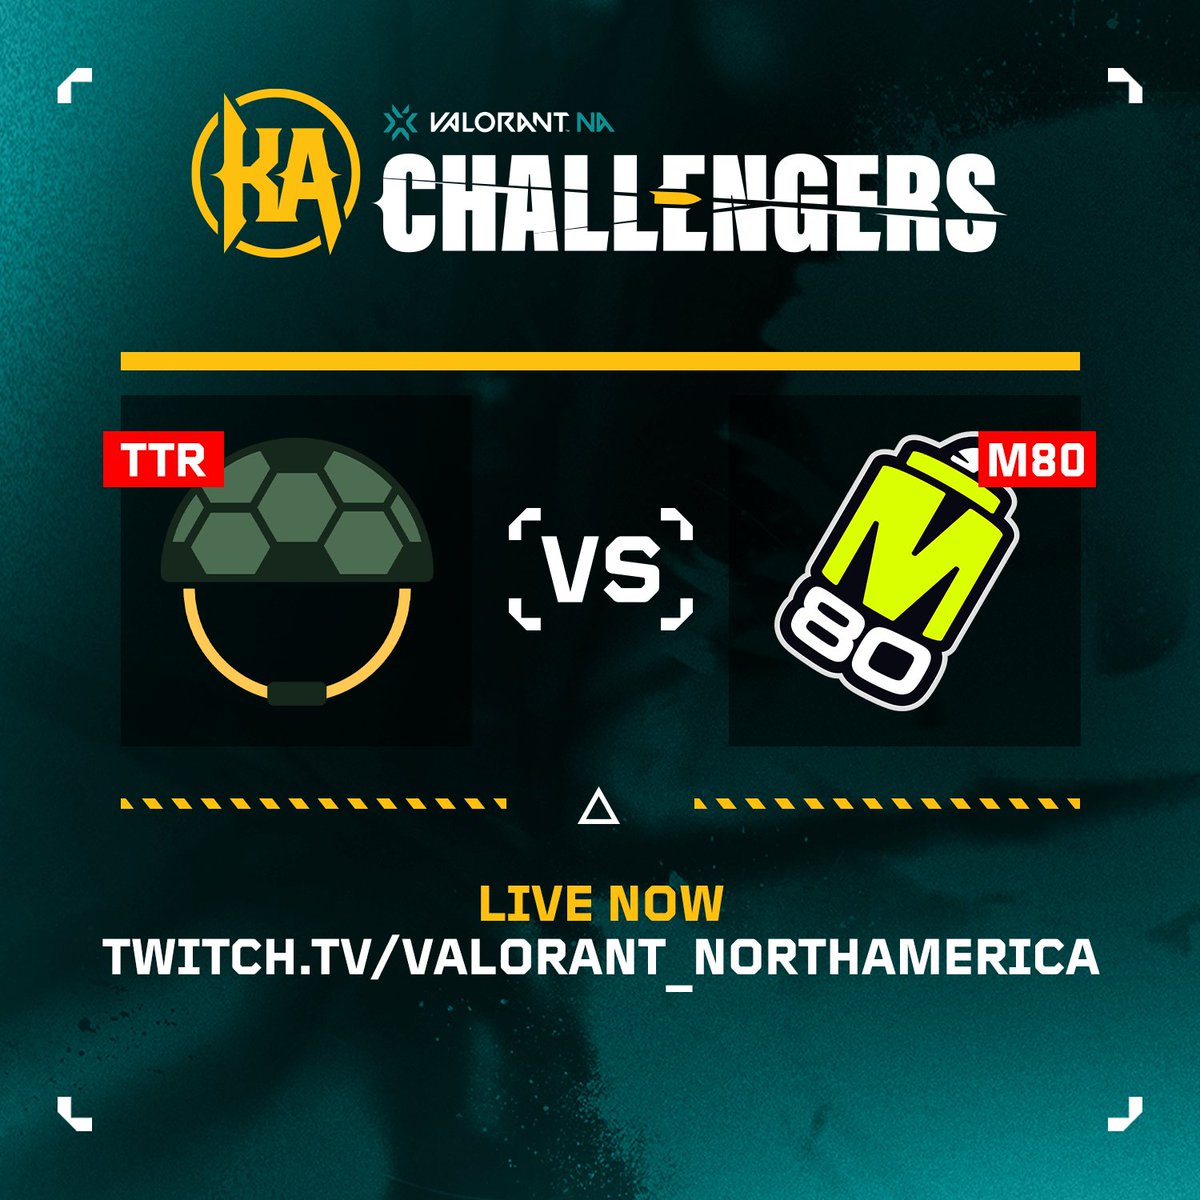 The next series is LIVE for Day 4 of #ChallengersNA Mid-Season Cup! Winner of this match advances to Grand Finals tomorrow to face @OXG_Valorant! (@turtletroopsval vs @M80gg) 📺twitch.tv/VALORANT_North…